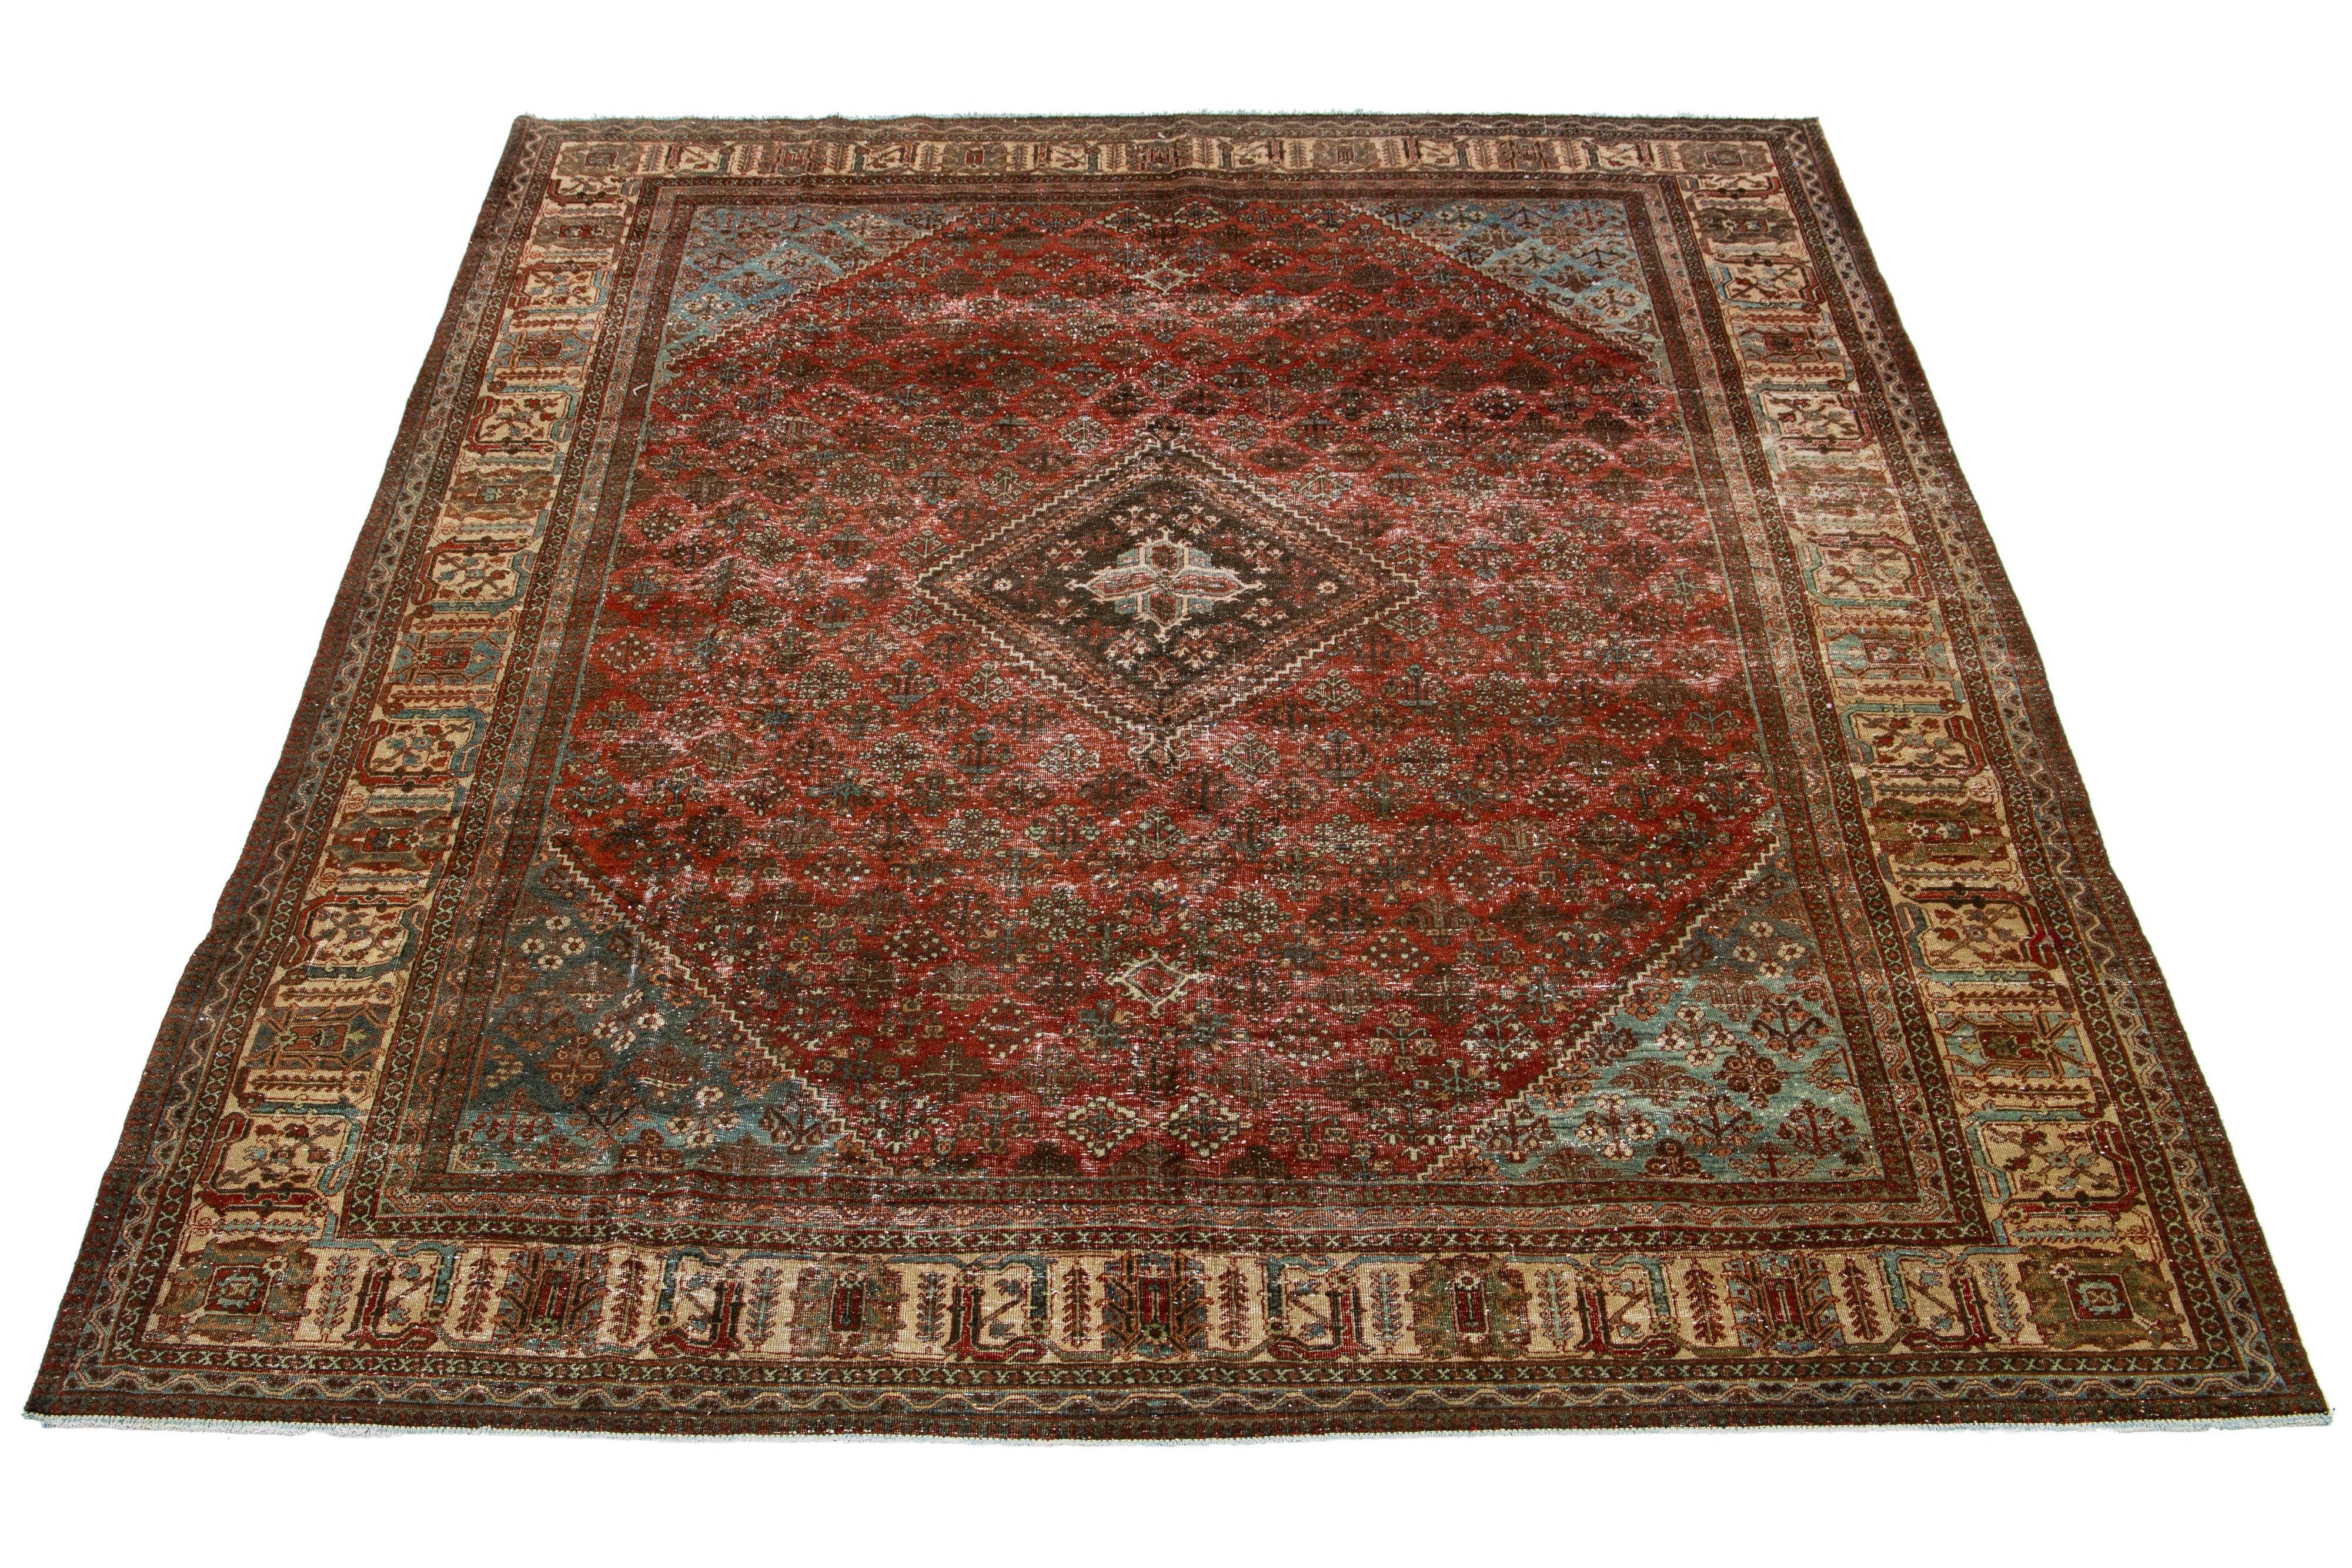 This Josheghan Persian wool rug antique hand-knotted using premium quality wool features an alluring brick red field with beige and blue accents arranged in a mesmerizing all-over floral design.

This rug measures 9'11